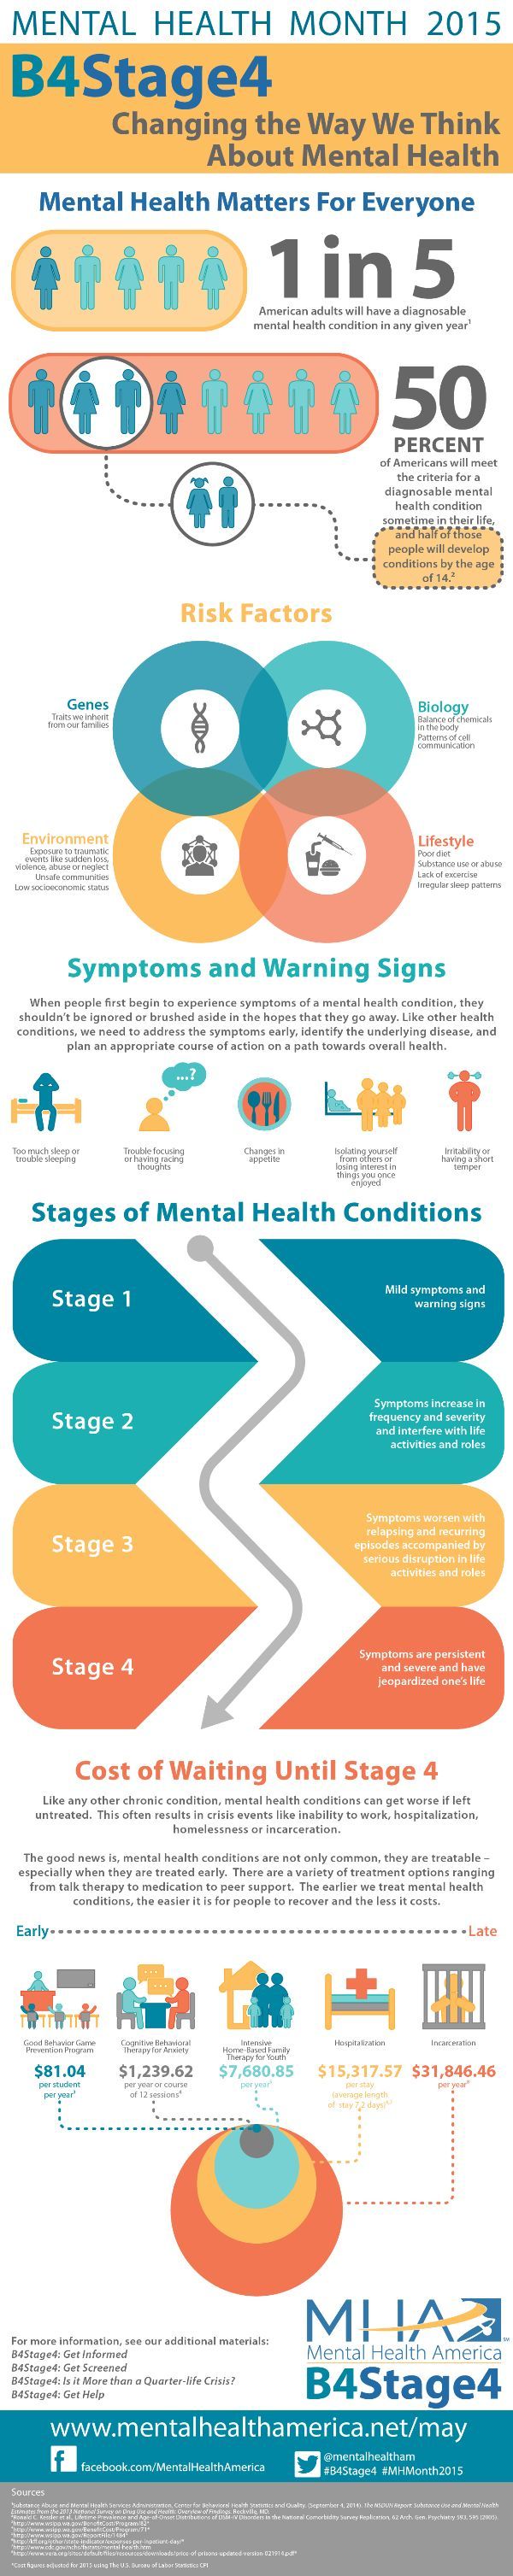 Psychology-Infographic-Infographic-outlining-the-Before-Stage-4-philosophy-B4Stage4.-Mental-health-con Psychology Infographic : Infographic outlining the Before Stage 4 philosophy #B4Stage4. Mental health con...